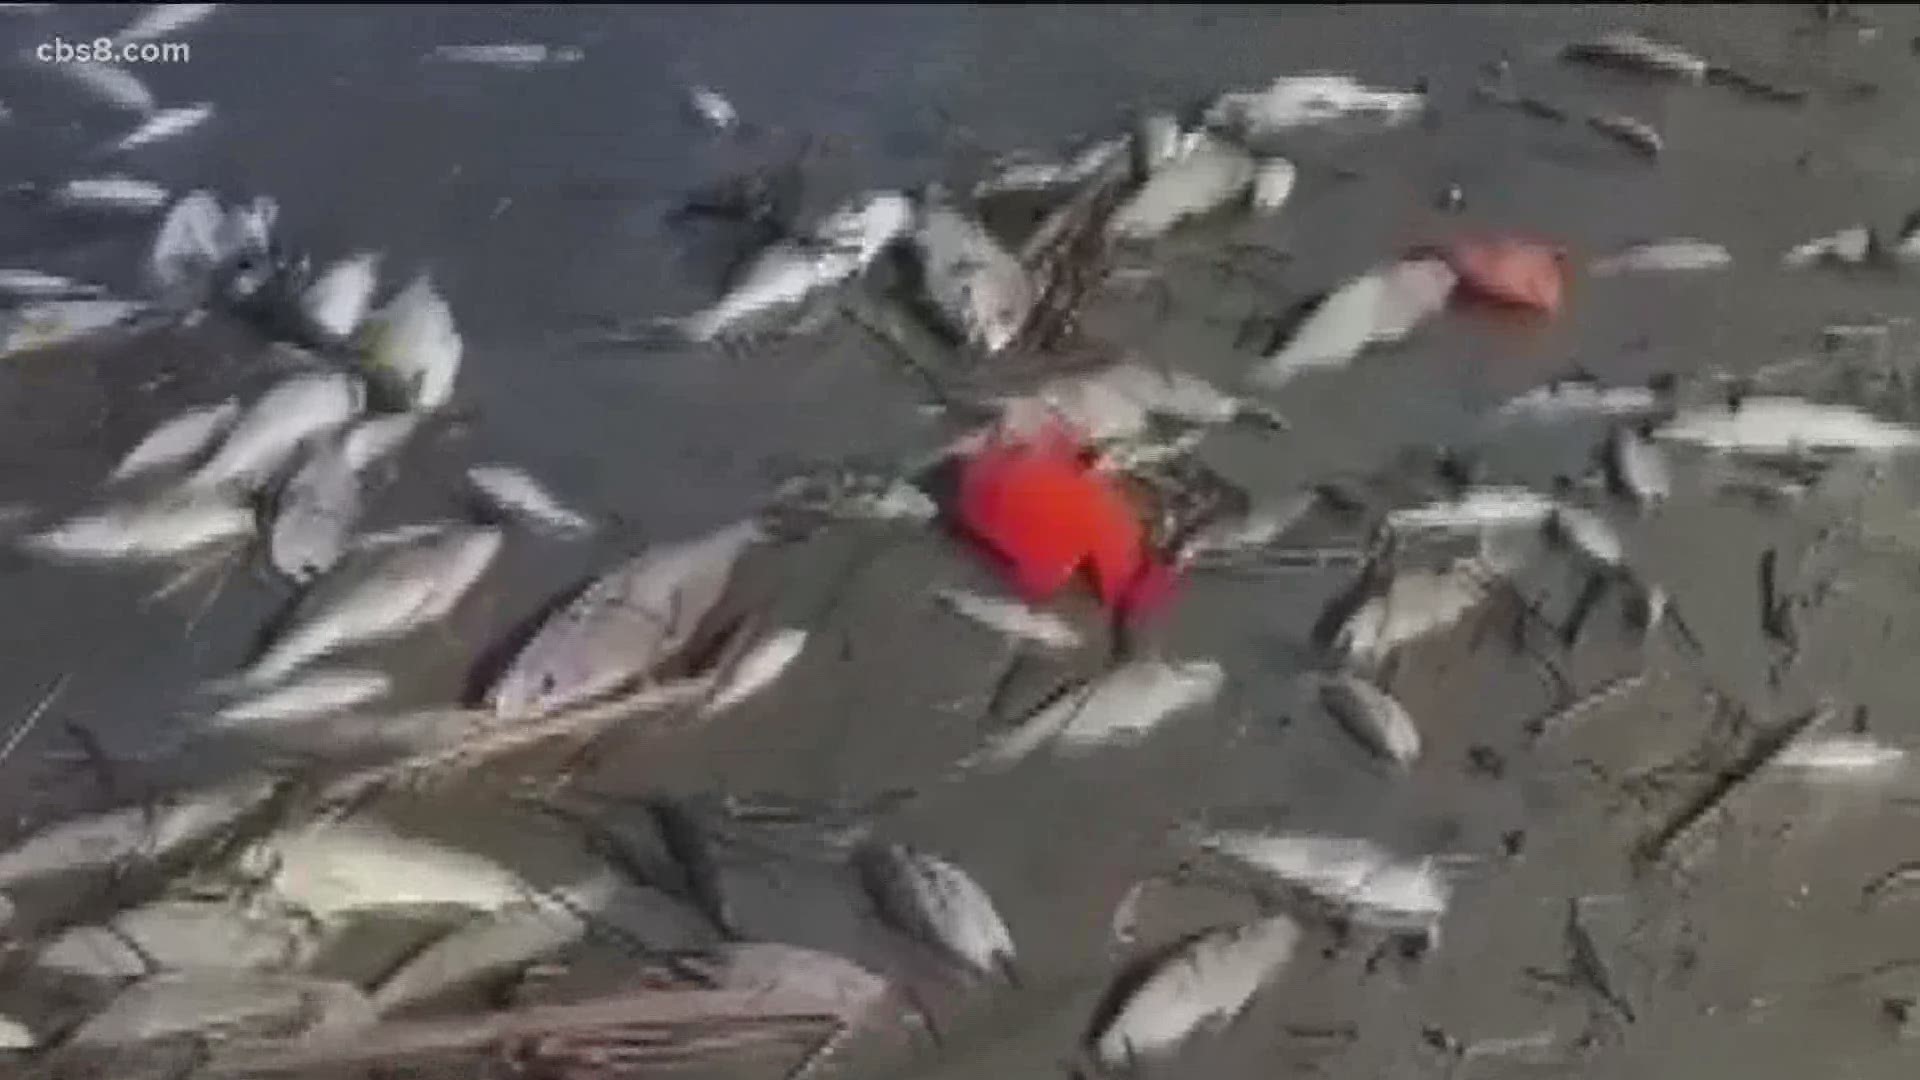 As the red tide filled Batiquitos Lagoon it used up all the oxygen in the water and residents noticed that the fish were no longer swimming in the water.